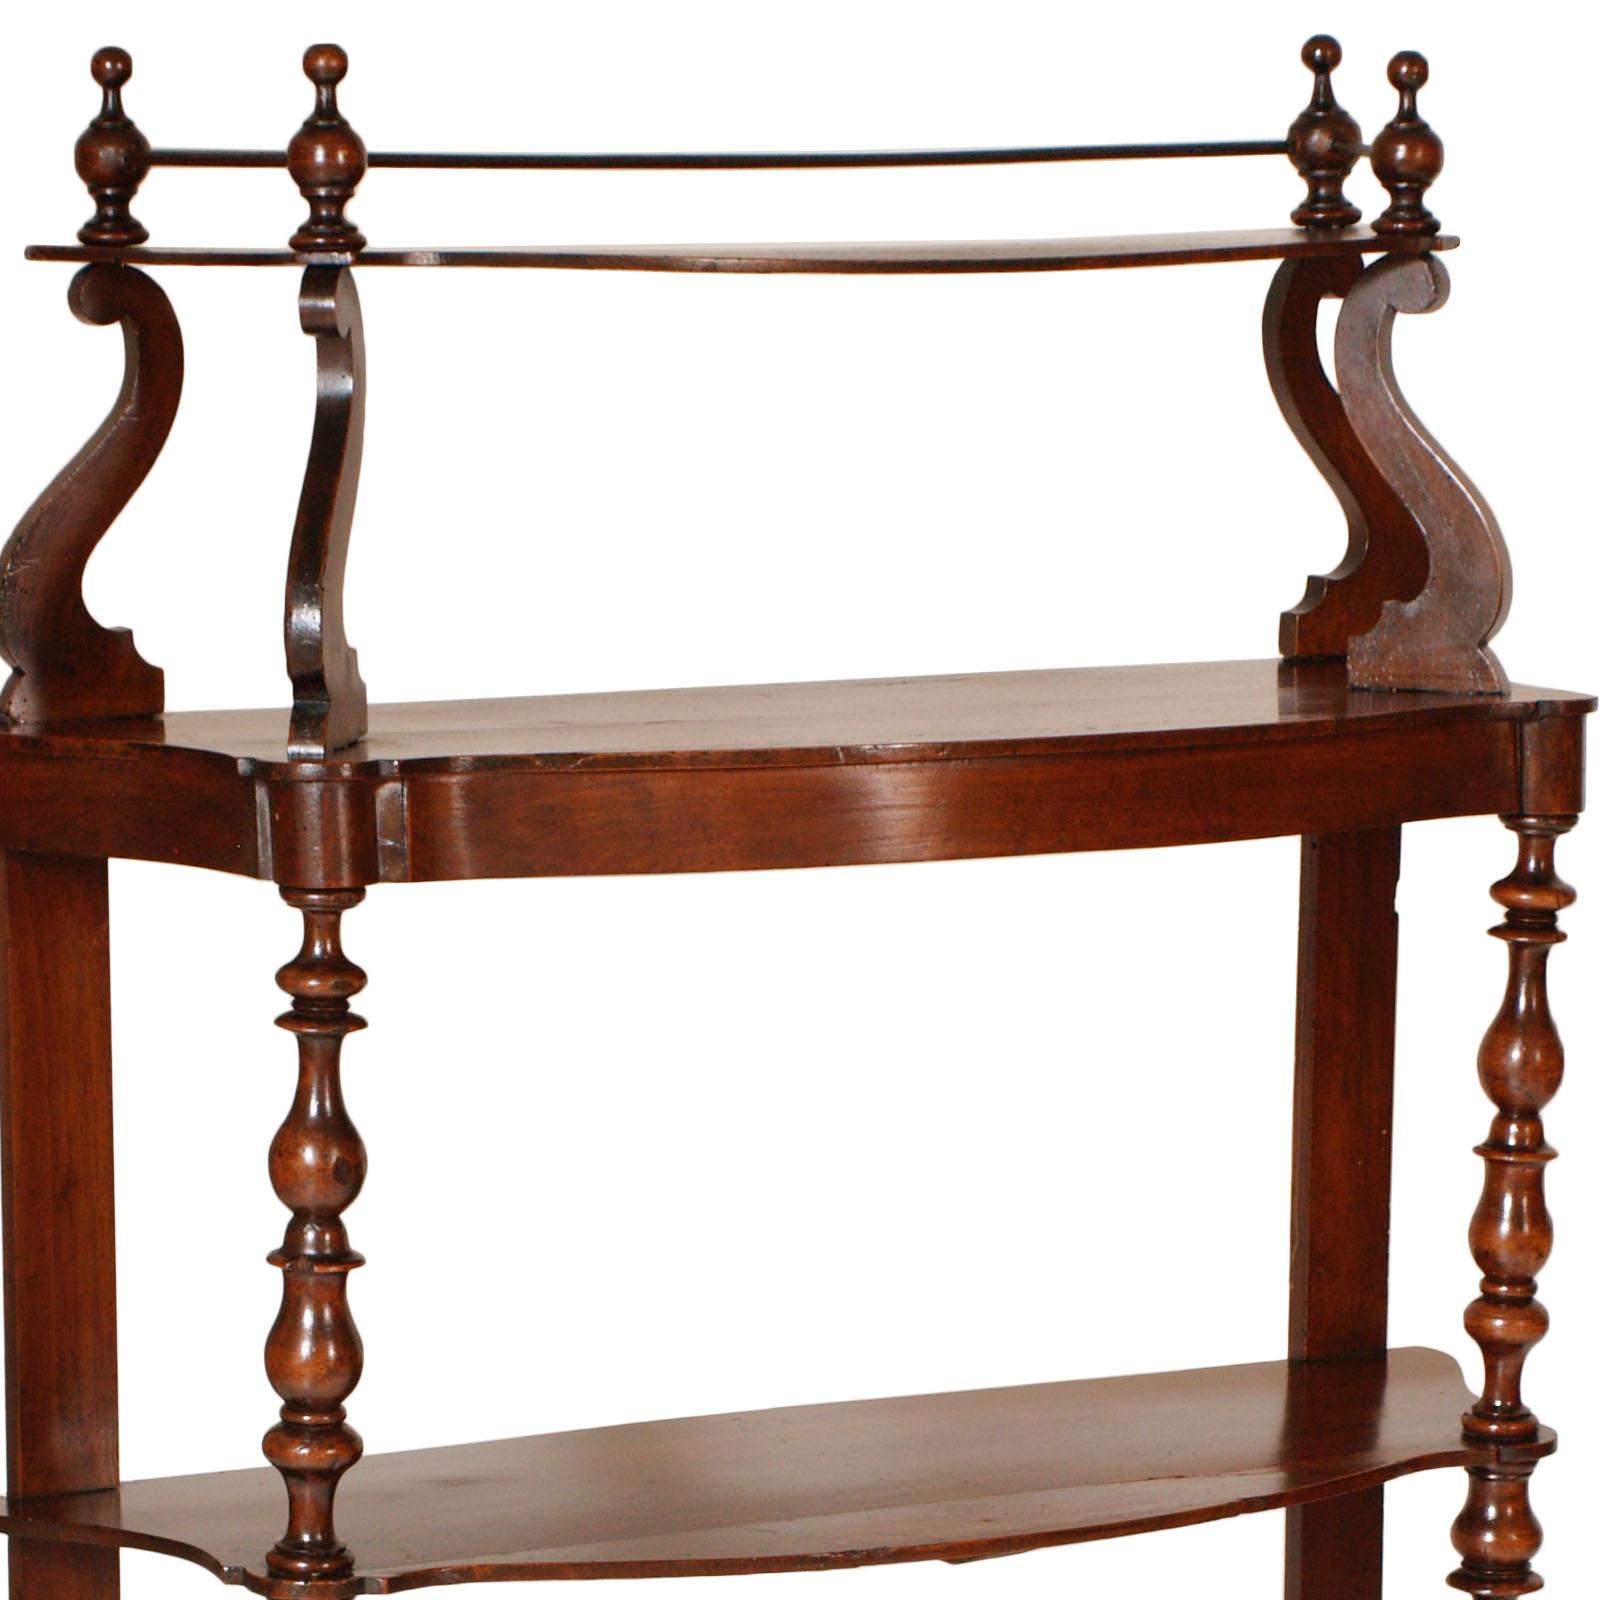 Very elegant 18th century Italian Baroque étagère in massive walnut, restored and polished with shellac and wax.

Measures in cm: H 135, W 97, D 35.

